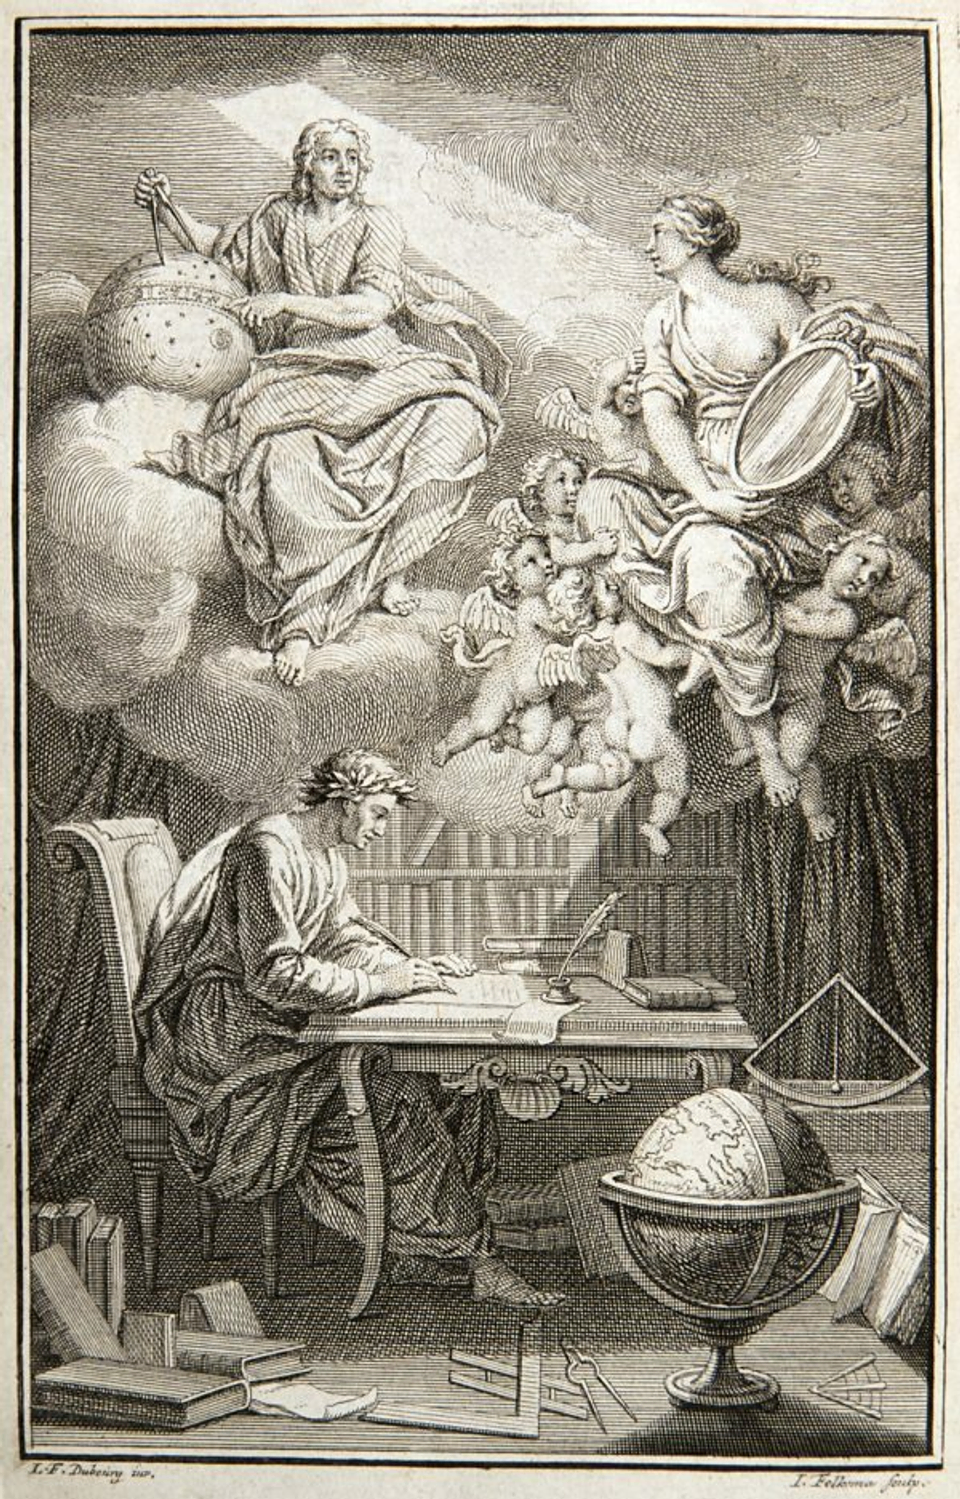 An illustration of Voltaire translating the work of Sir Isaac Newton